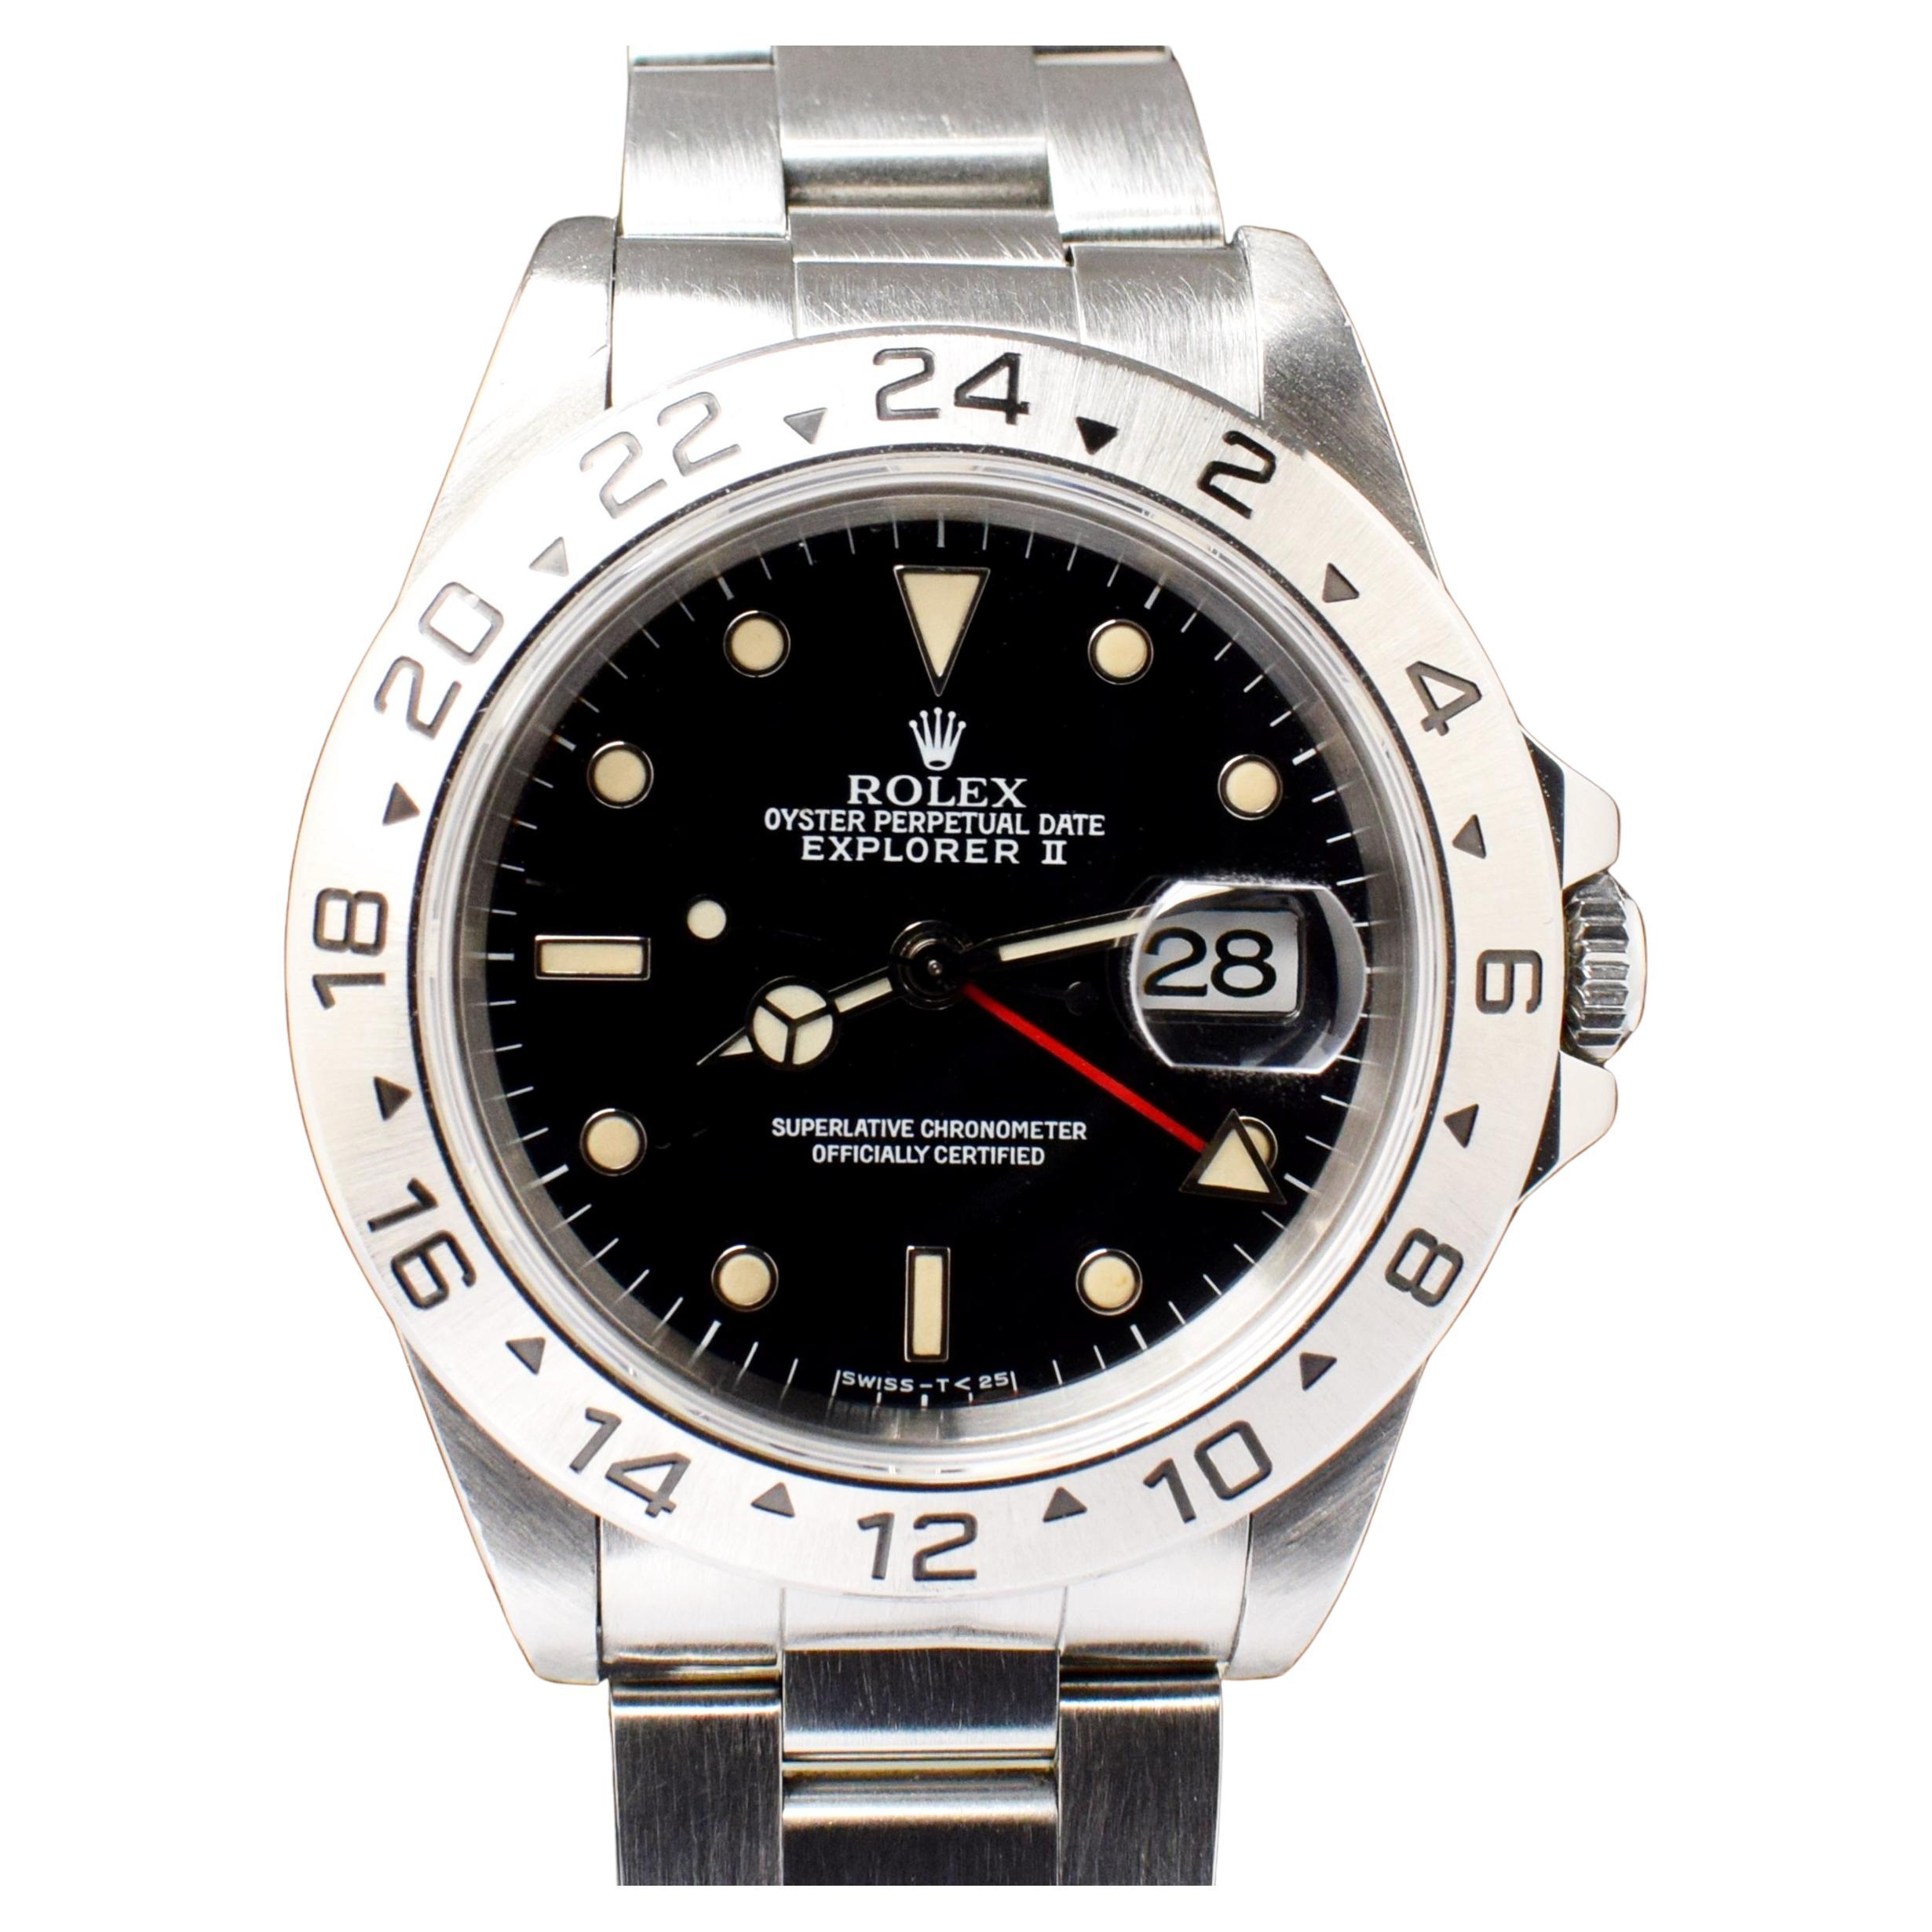 Rolex Explorer II Black Creamy Dial 16570 Steel Automatic Watch with Paper 1995